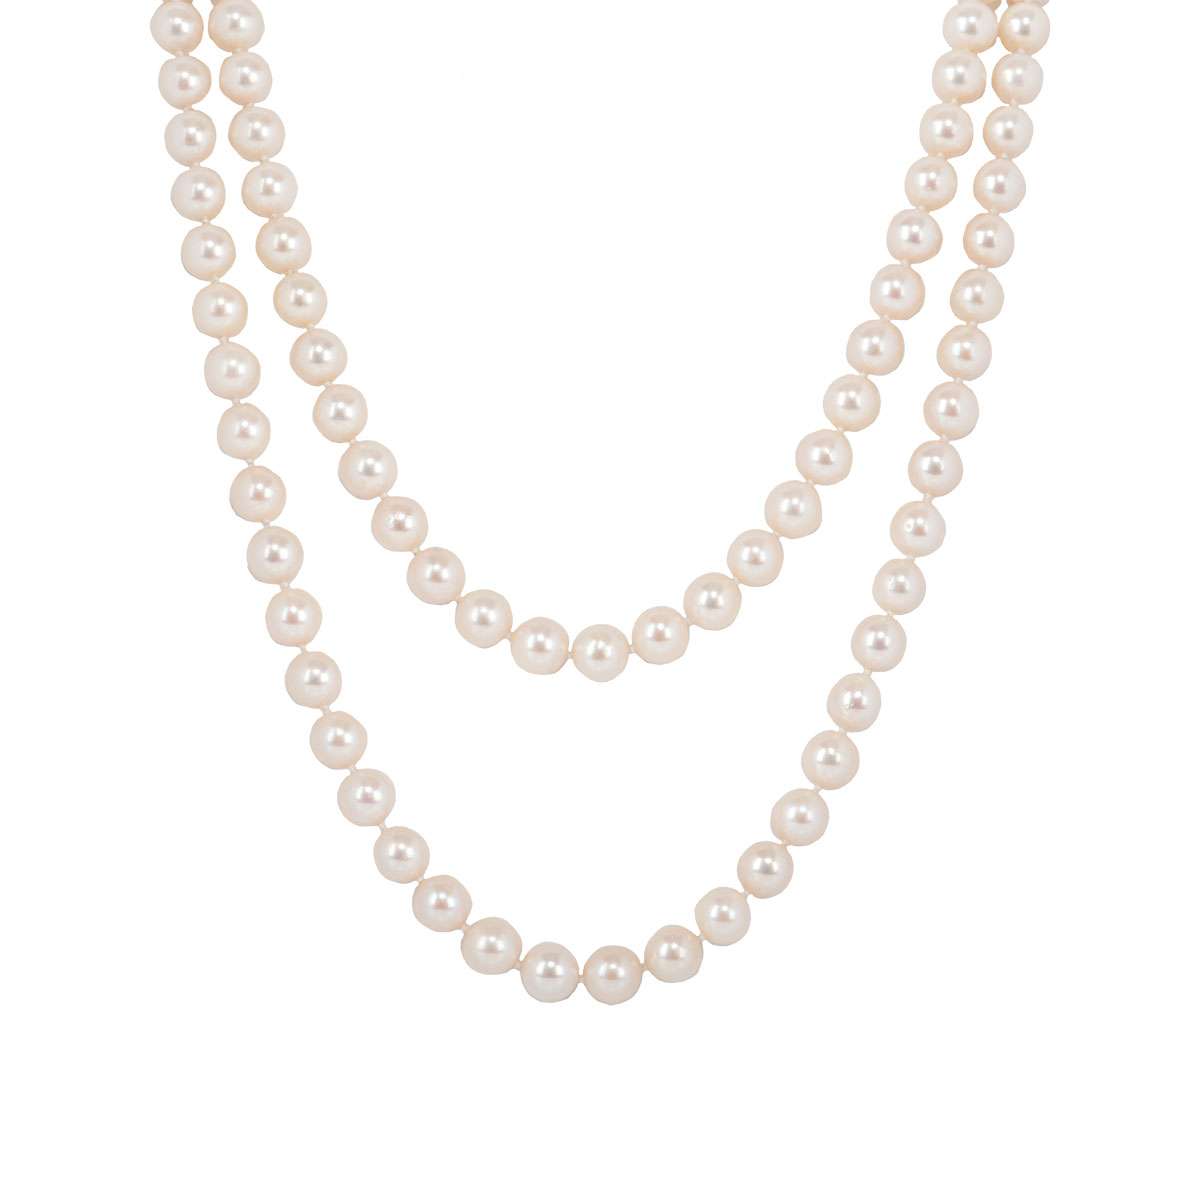 Yellow Gold Diamond, Emerald and Pearl Necklace